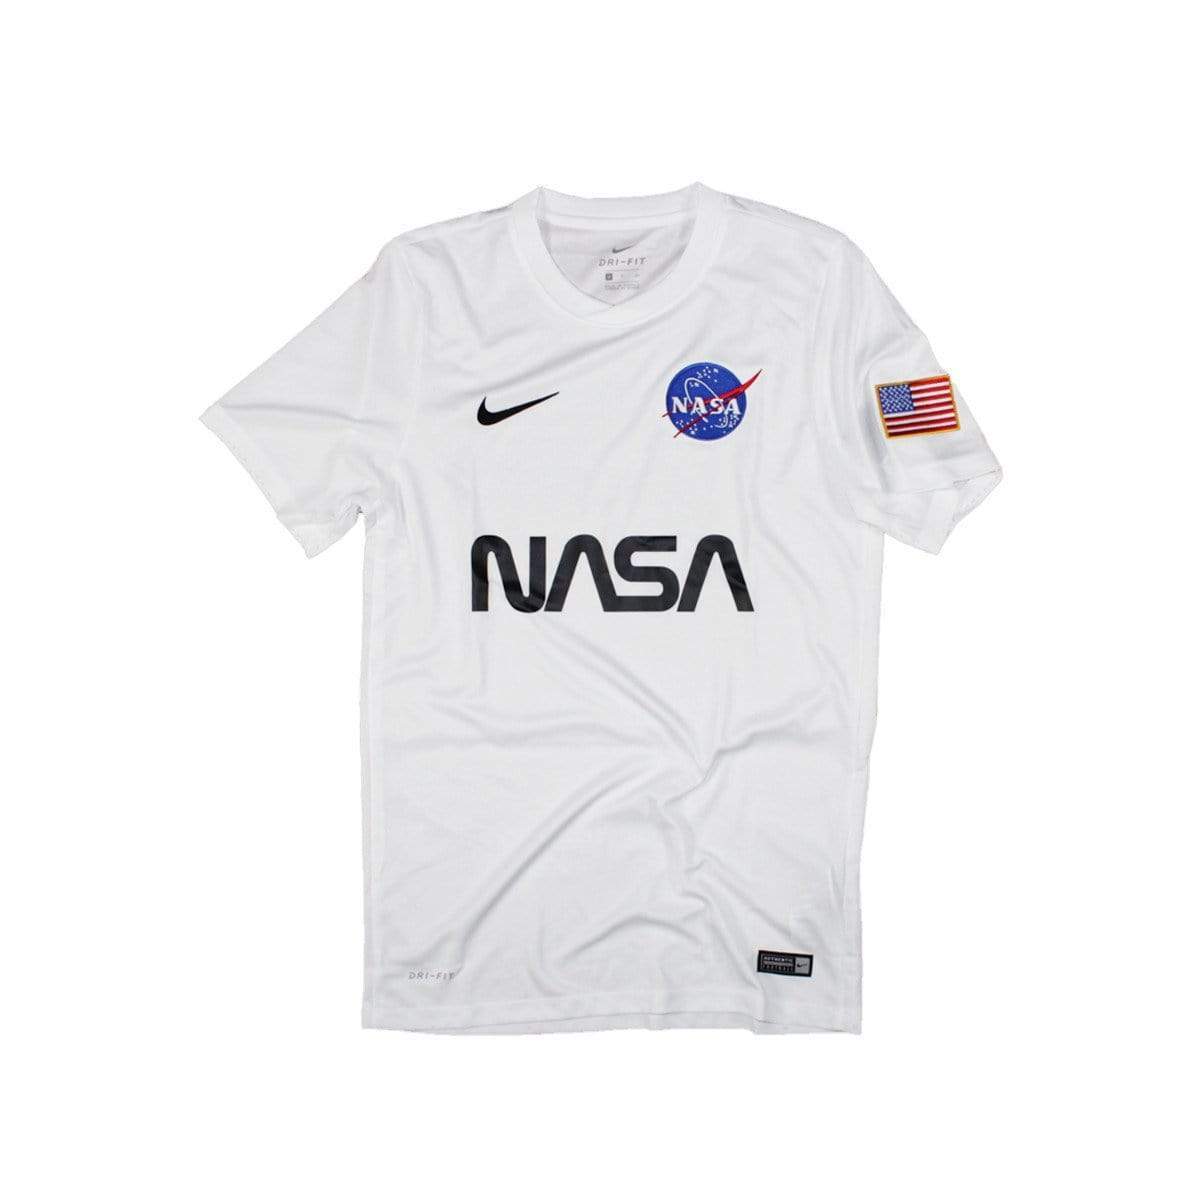 Astronaut Jersey by The Concept Club White Shirt Collective